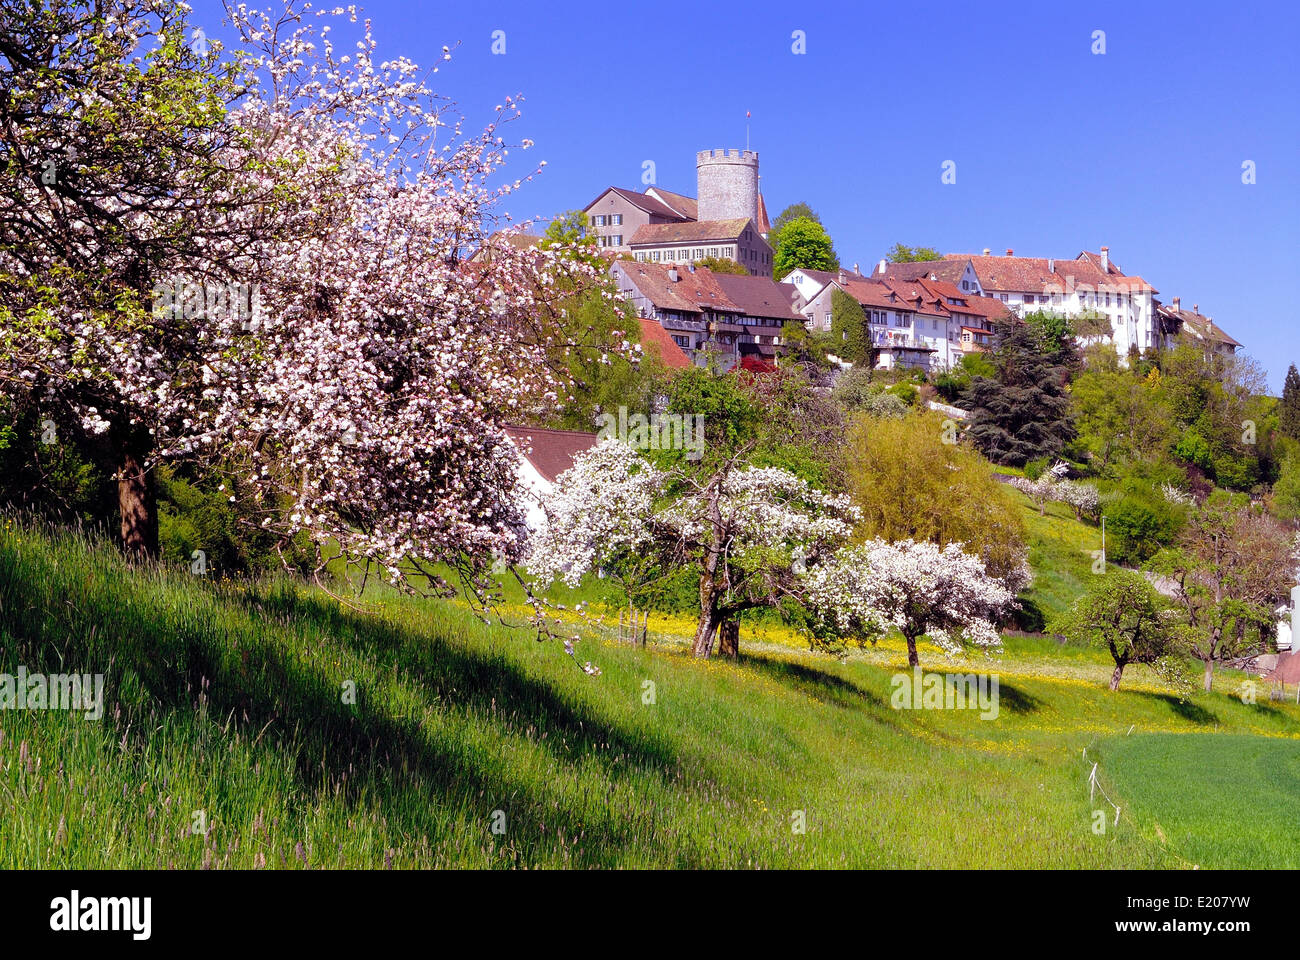 Townscape with flowering fruit trees, Regensberg, Canton of Zurich, Switzerland Stock Photo